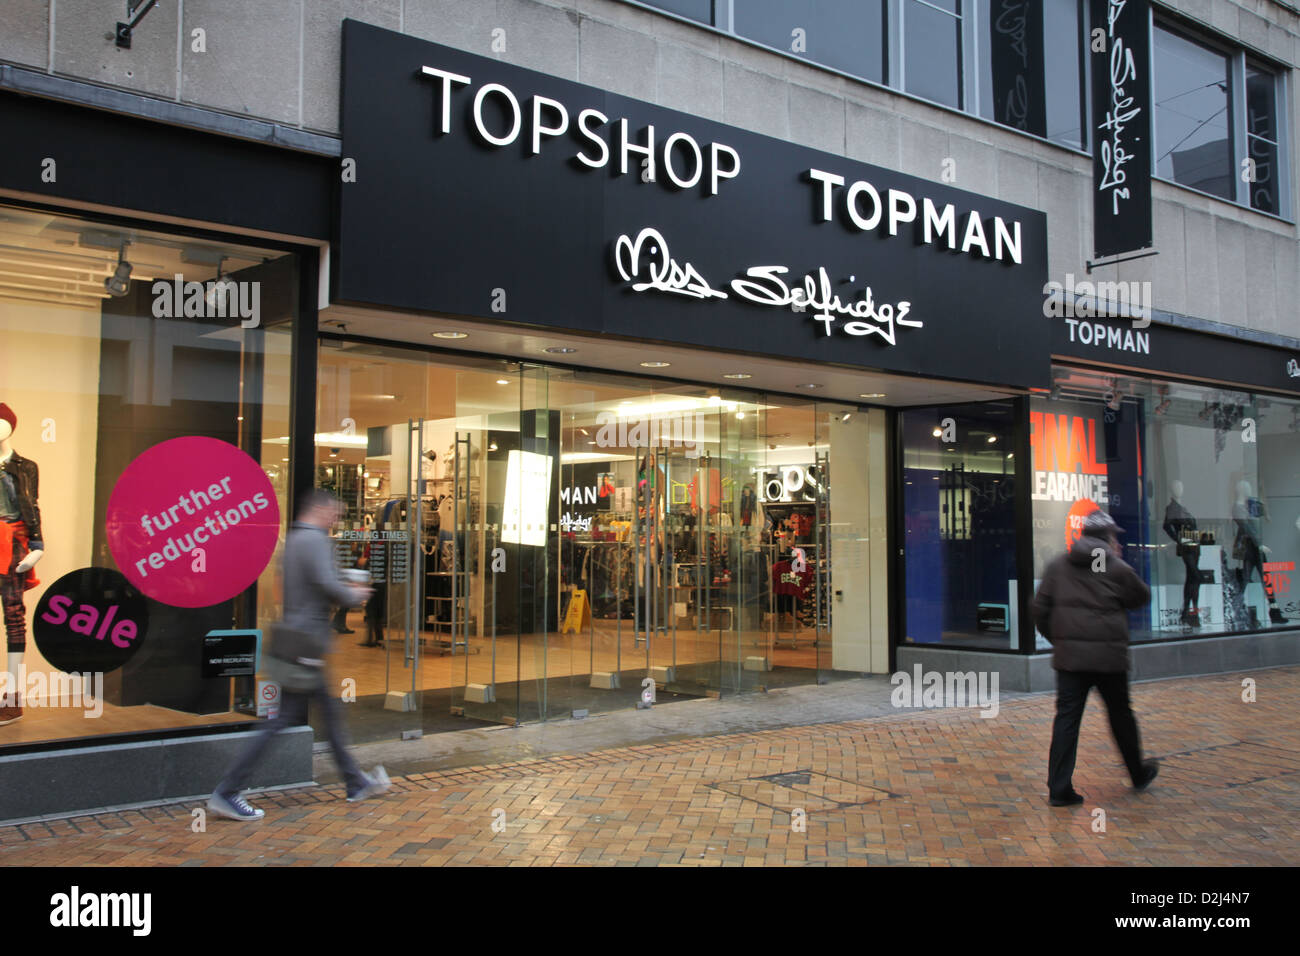 Page 2 - Topman Clothing Shop High Resolution Stock Photography and Images  - Alamy